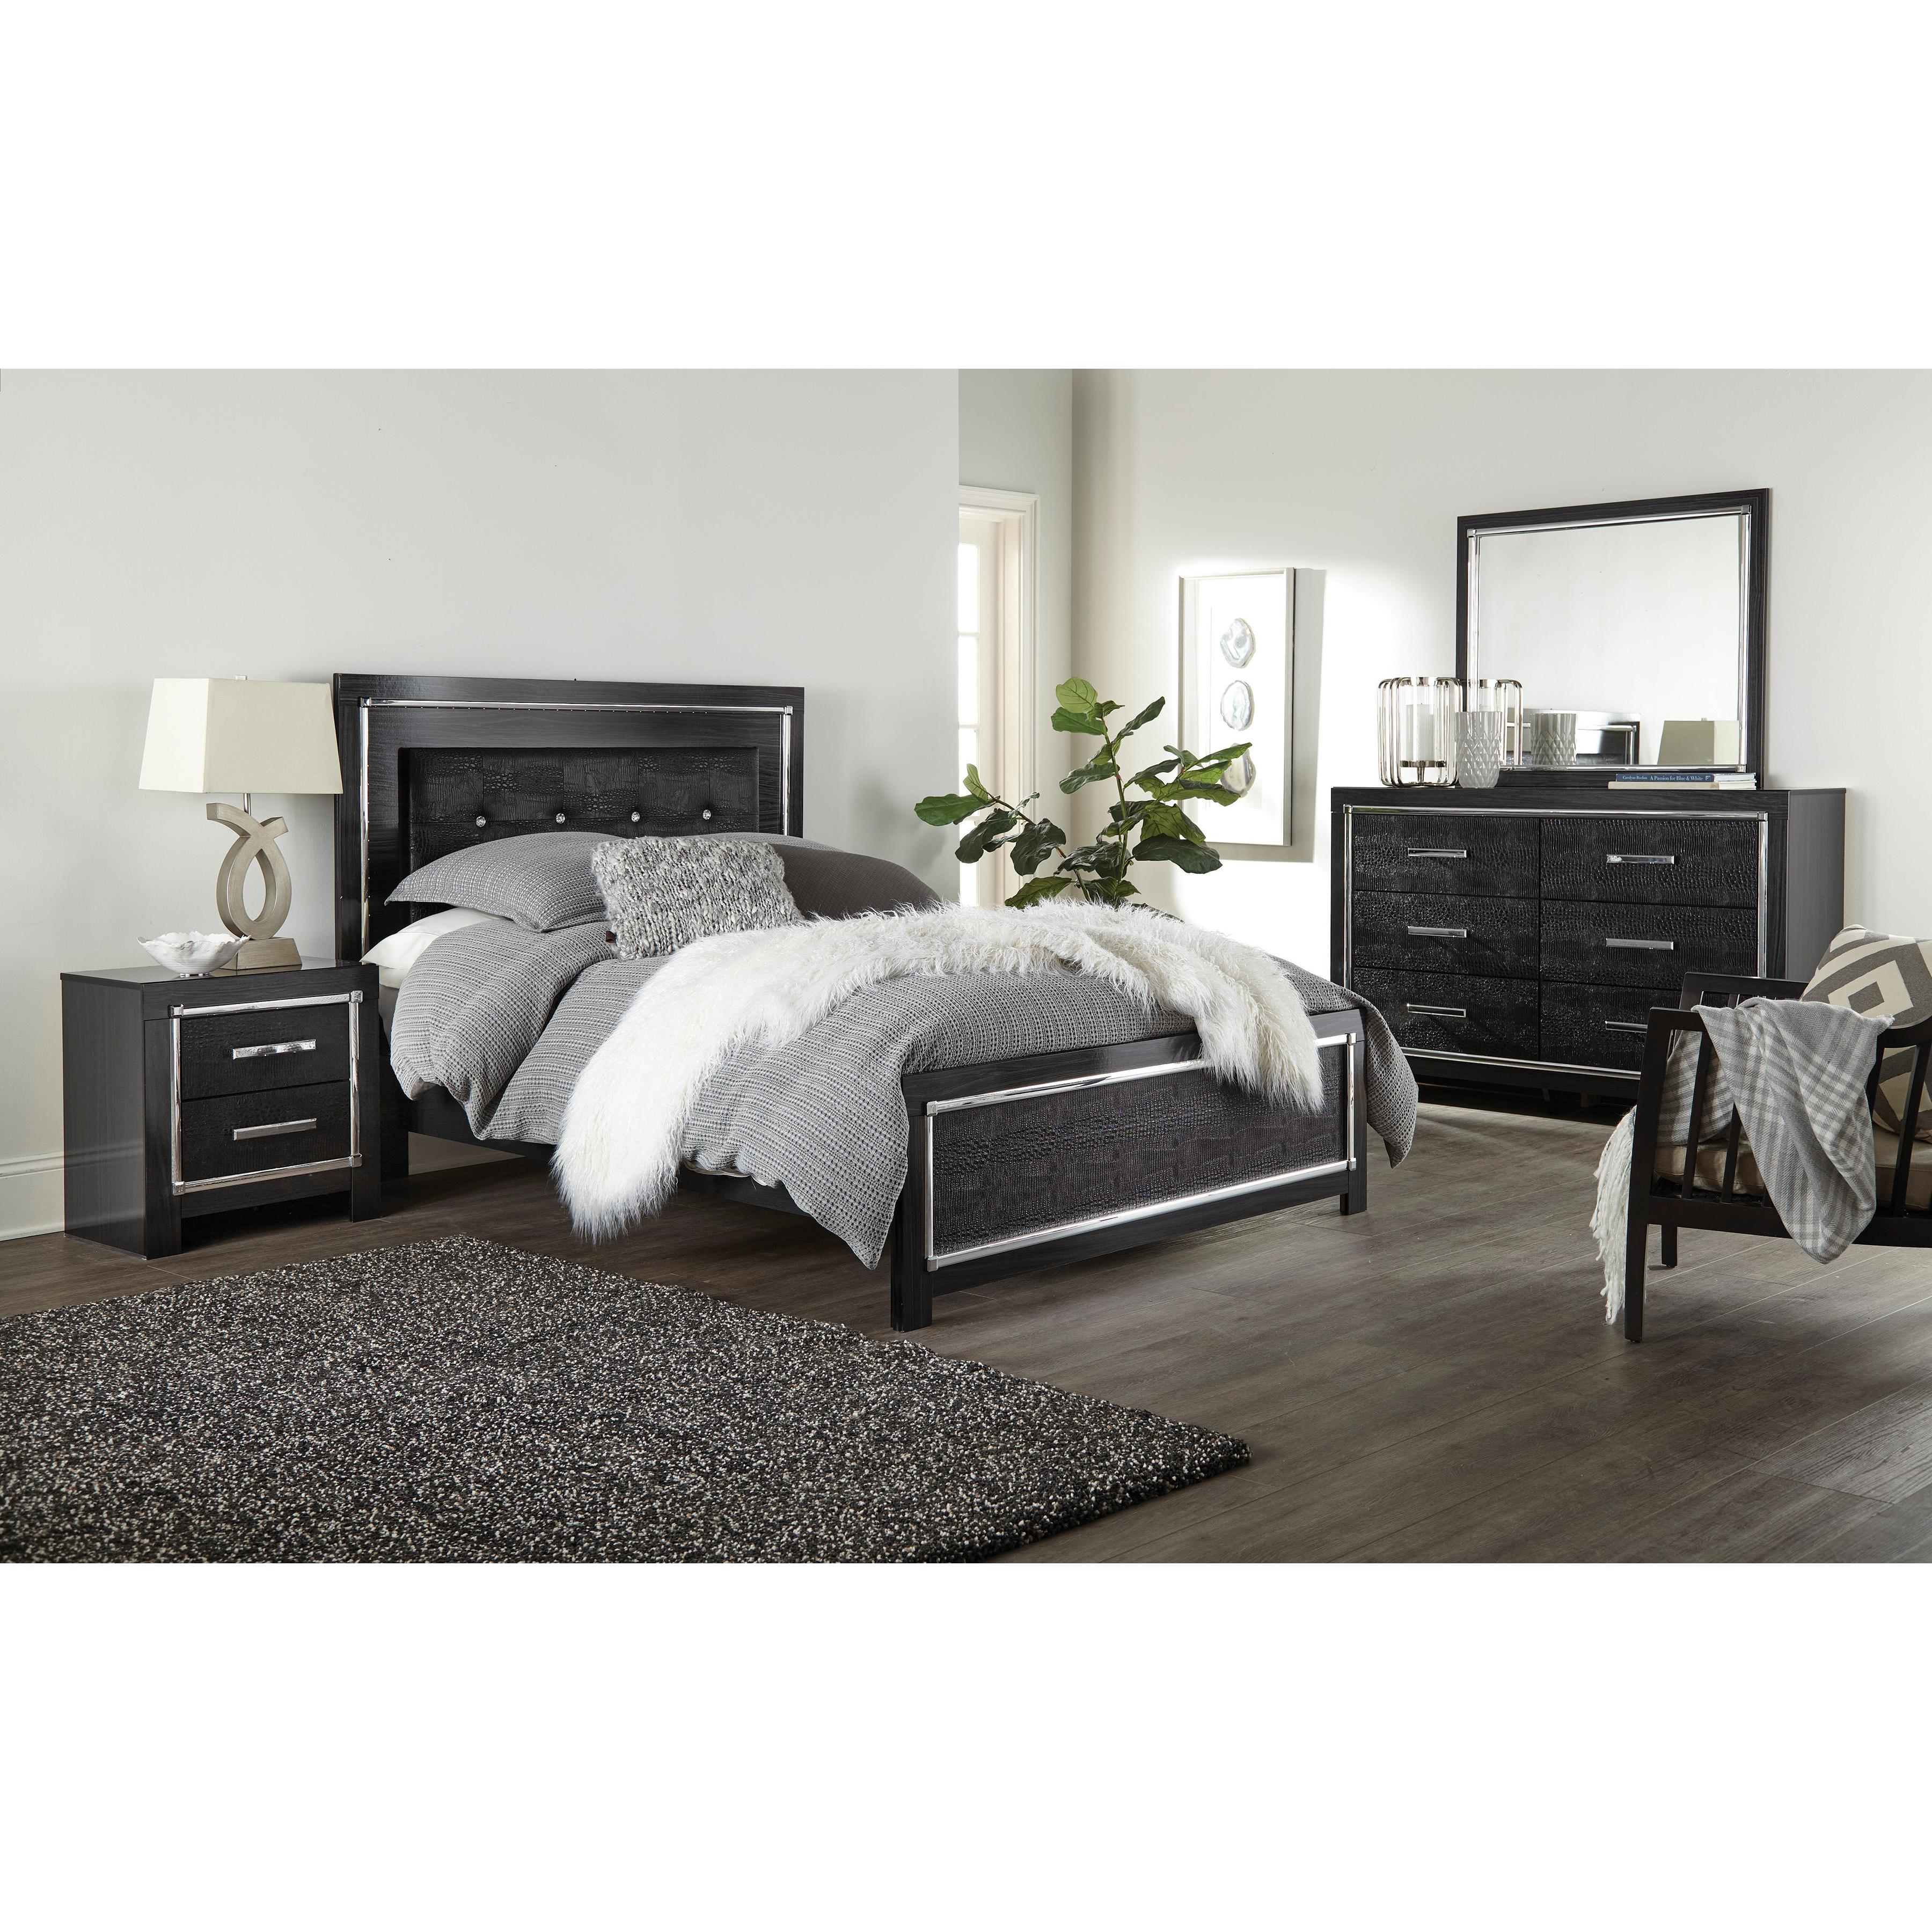 Signature Design by Ashley Kaydell B1420 6 pc Queen Panel Bedroom Set